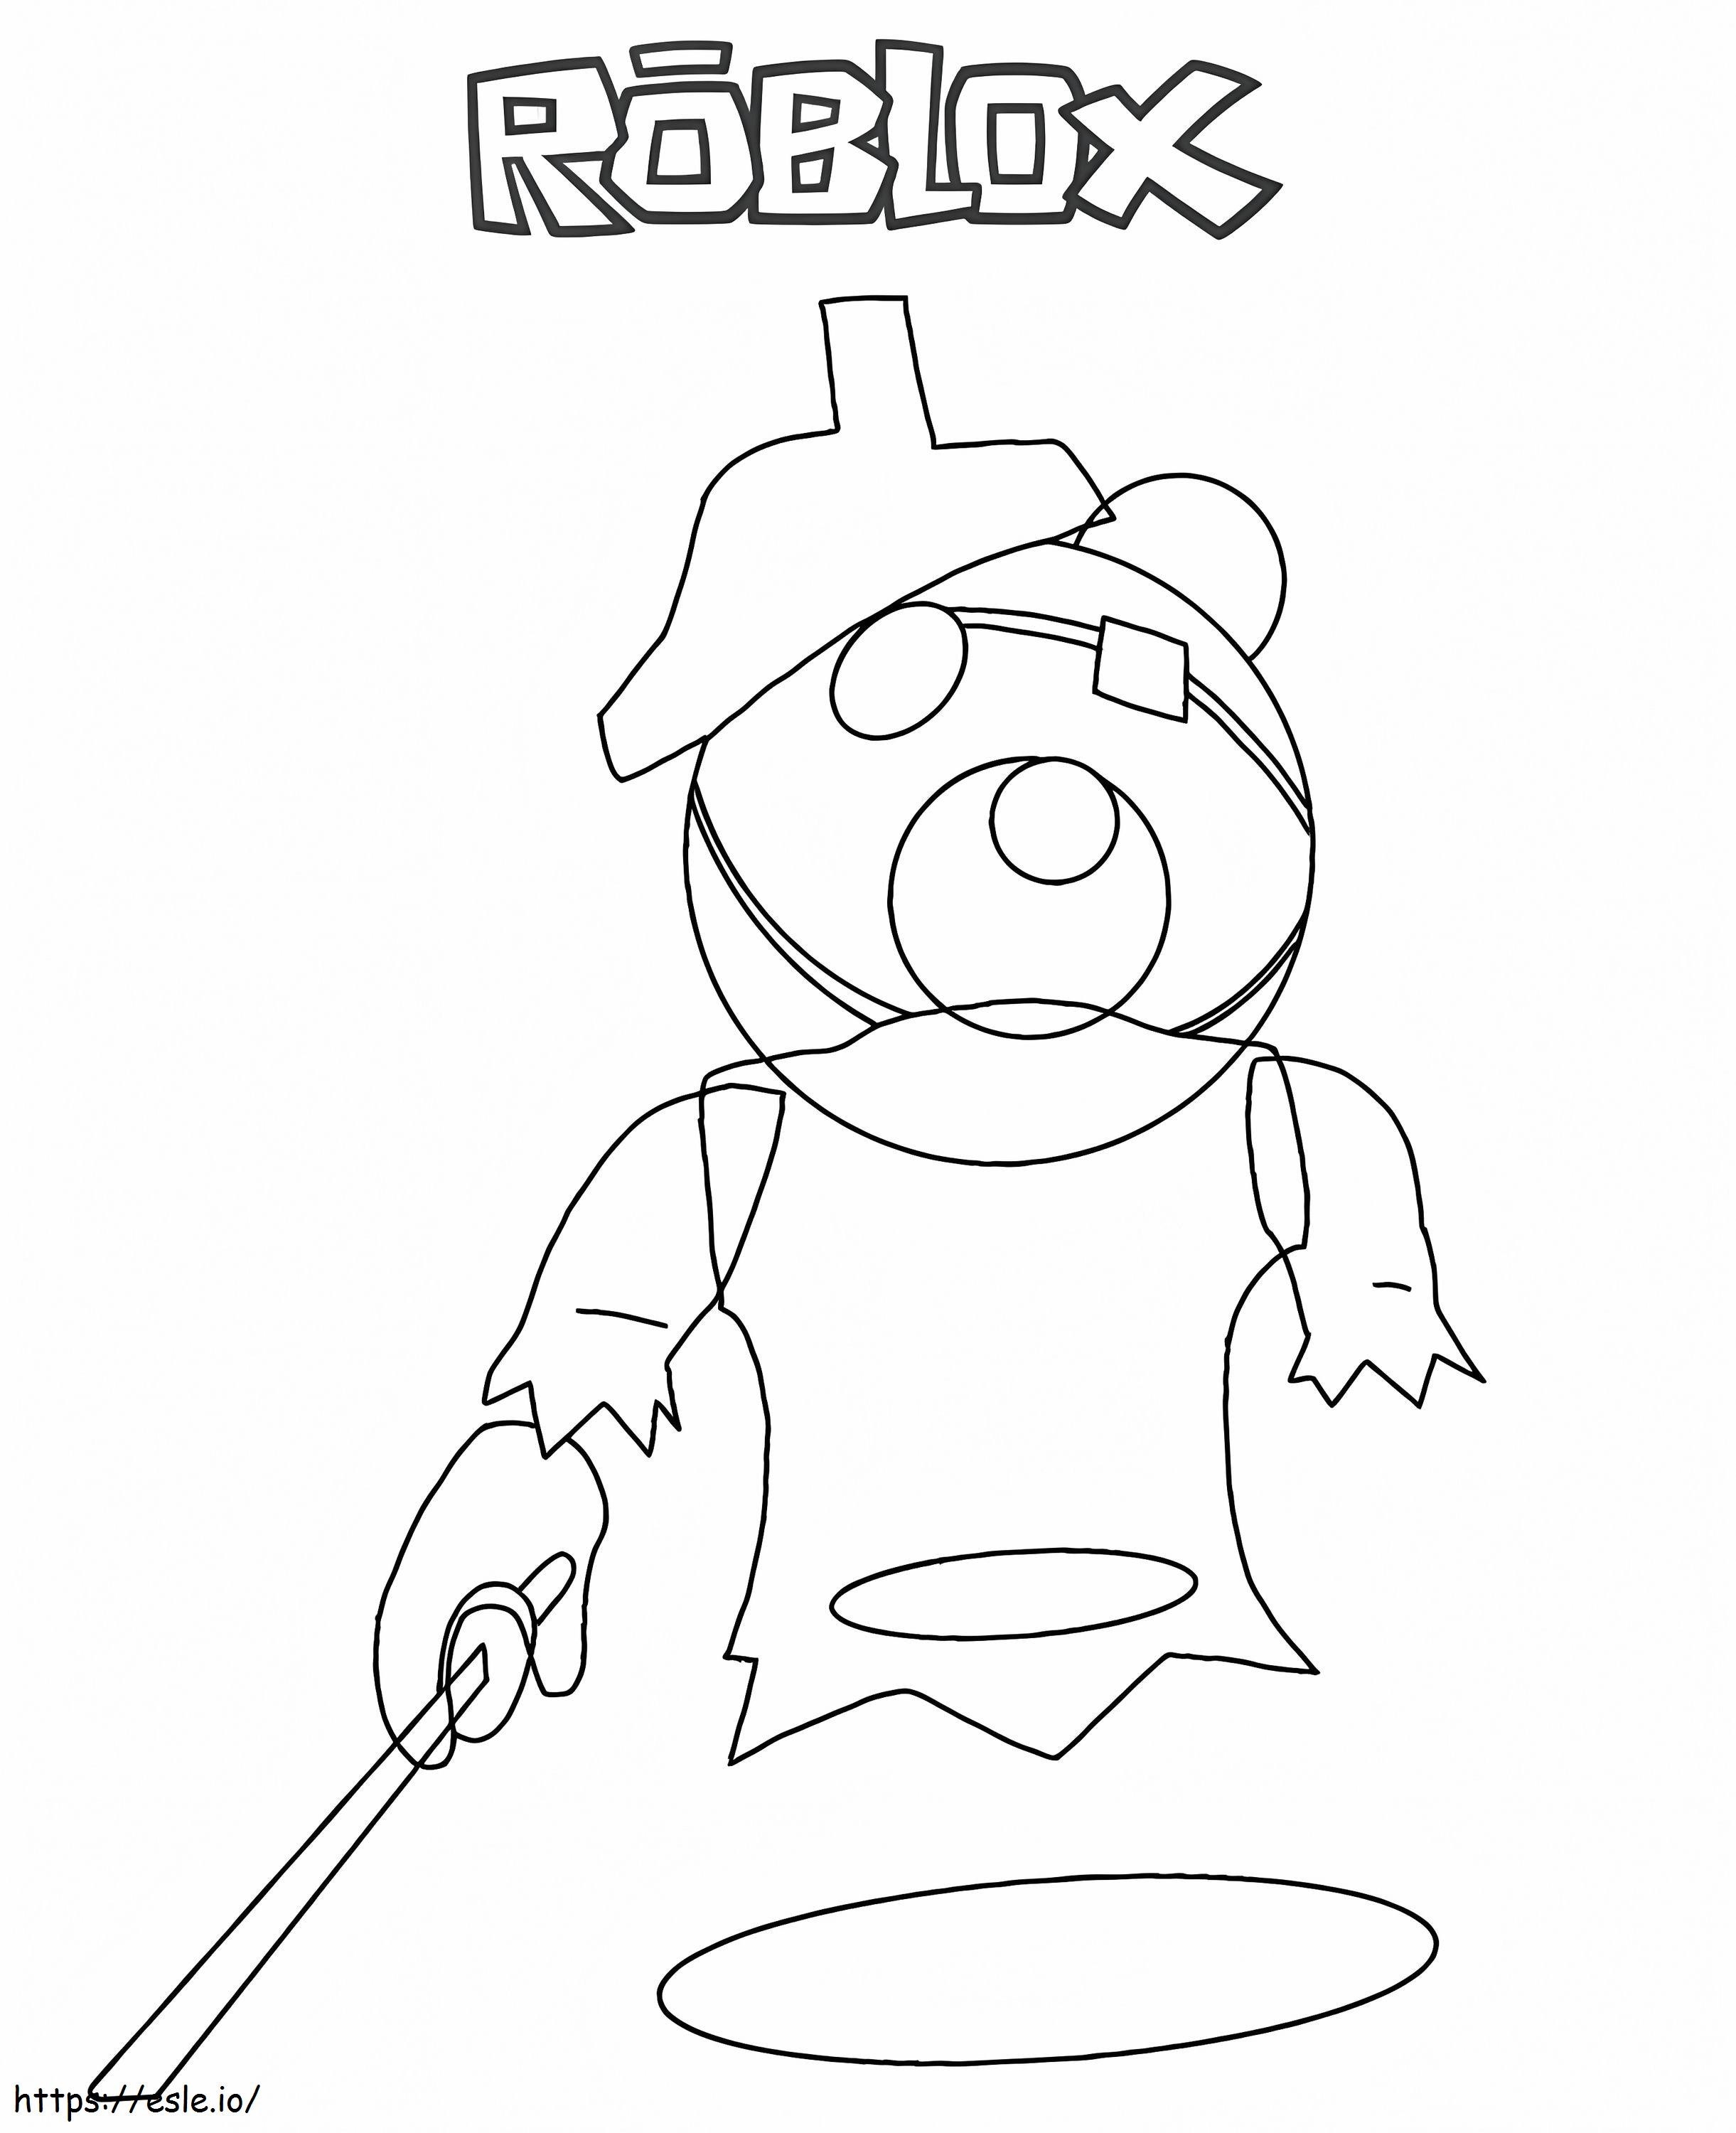 Ghosty Piggy Roblox coloring page